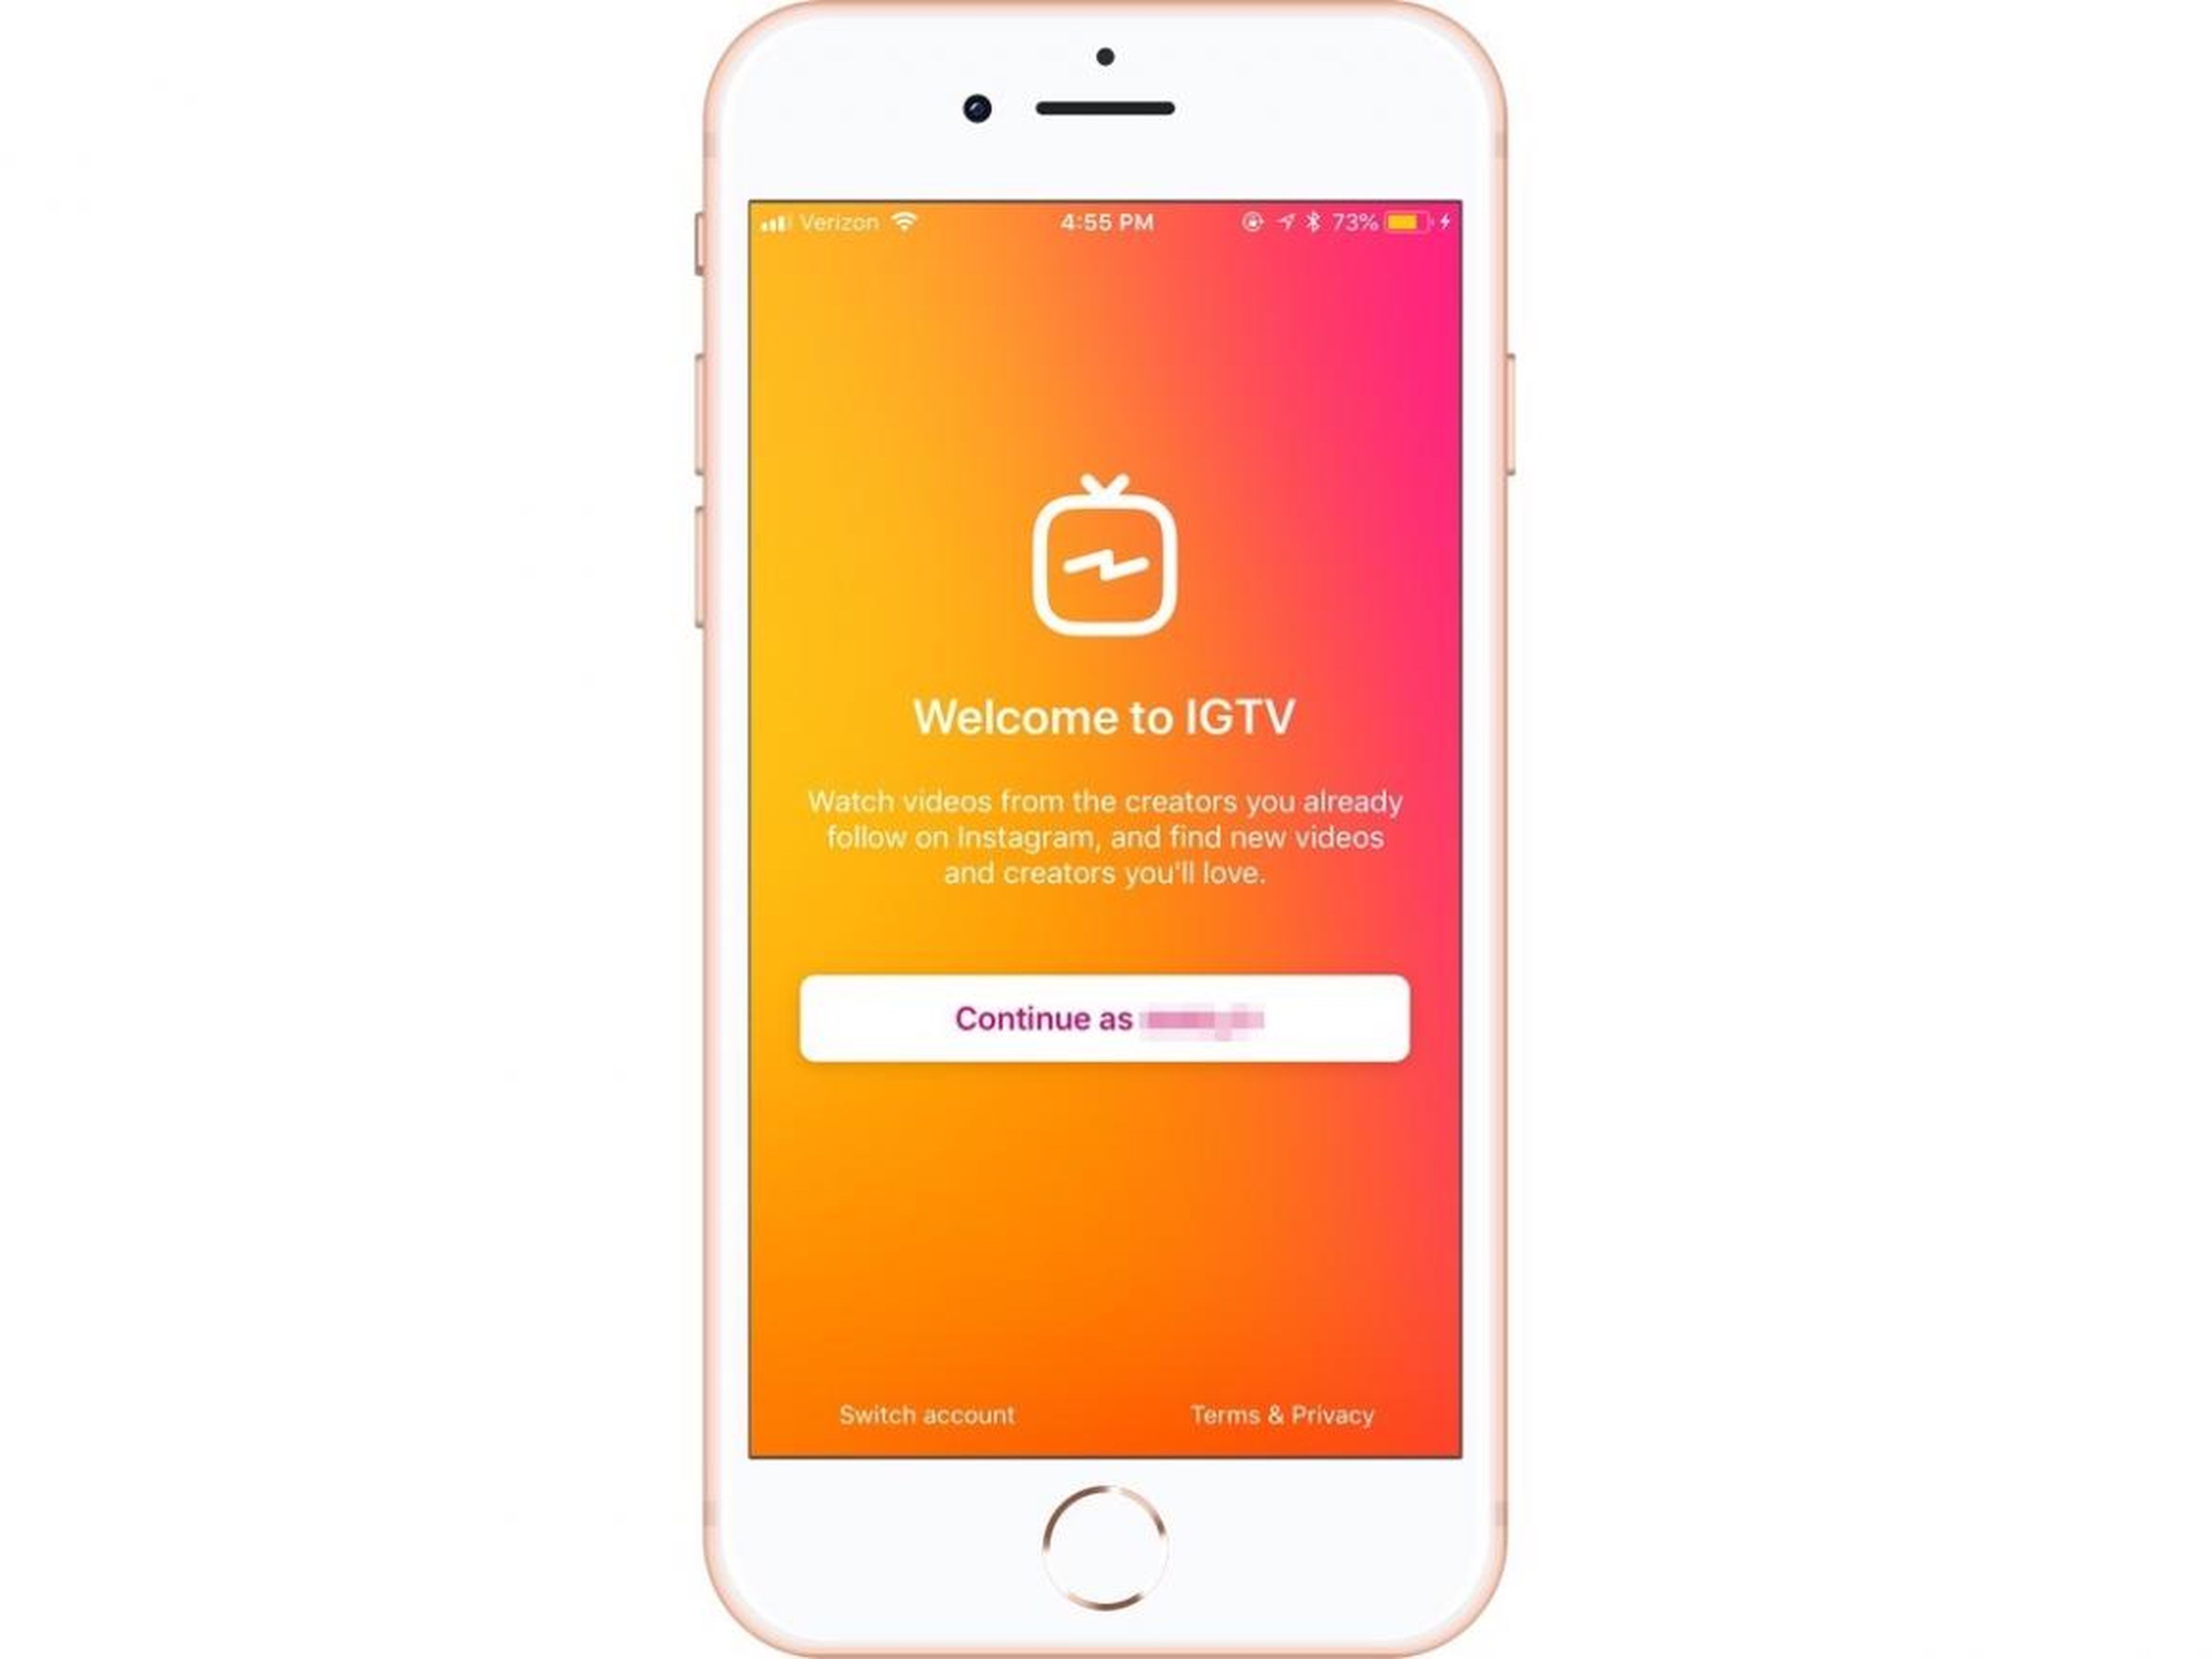 Because IGTV and Instagram work closely together, you don't have to create a separate IGTV login. As long as you're logged into the main Instagram app, all you have to do is hit "Continue."